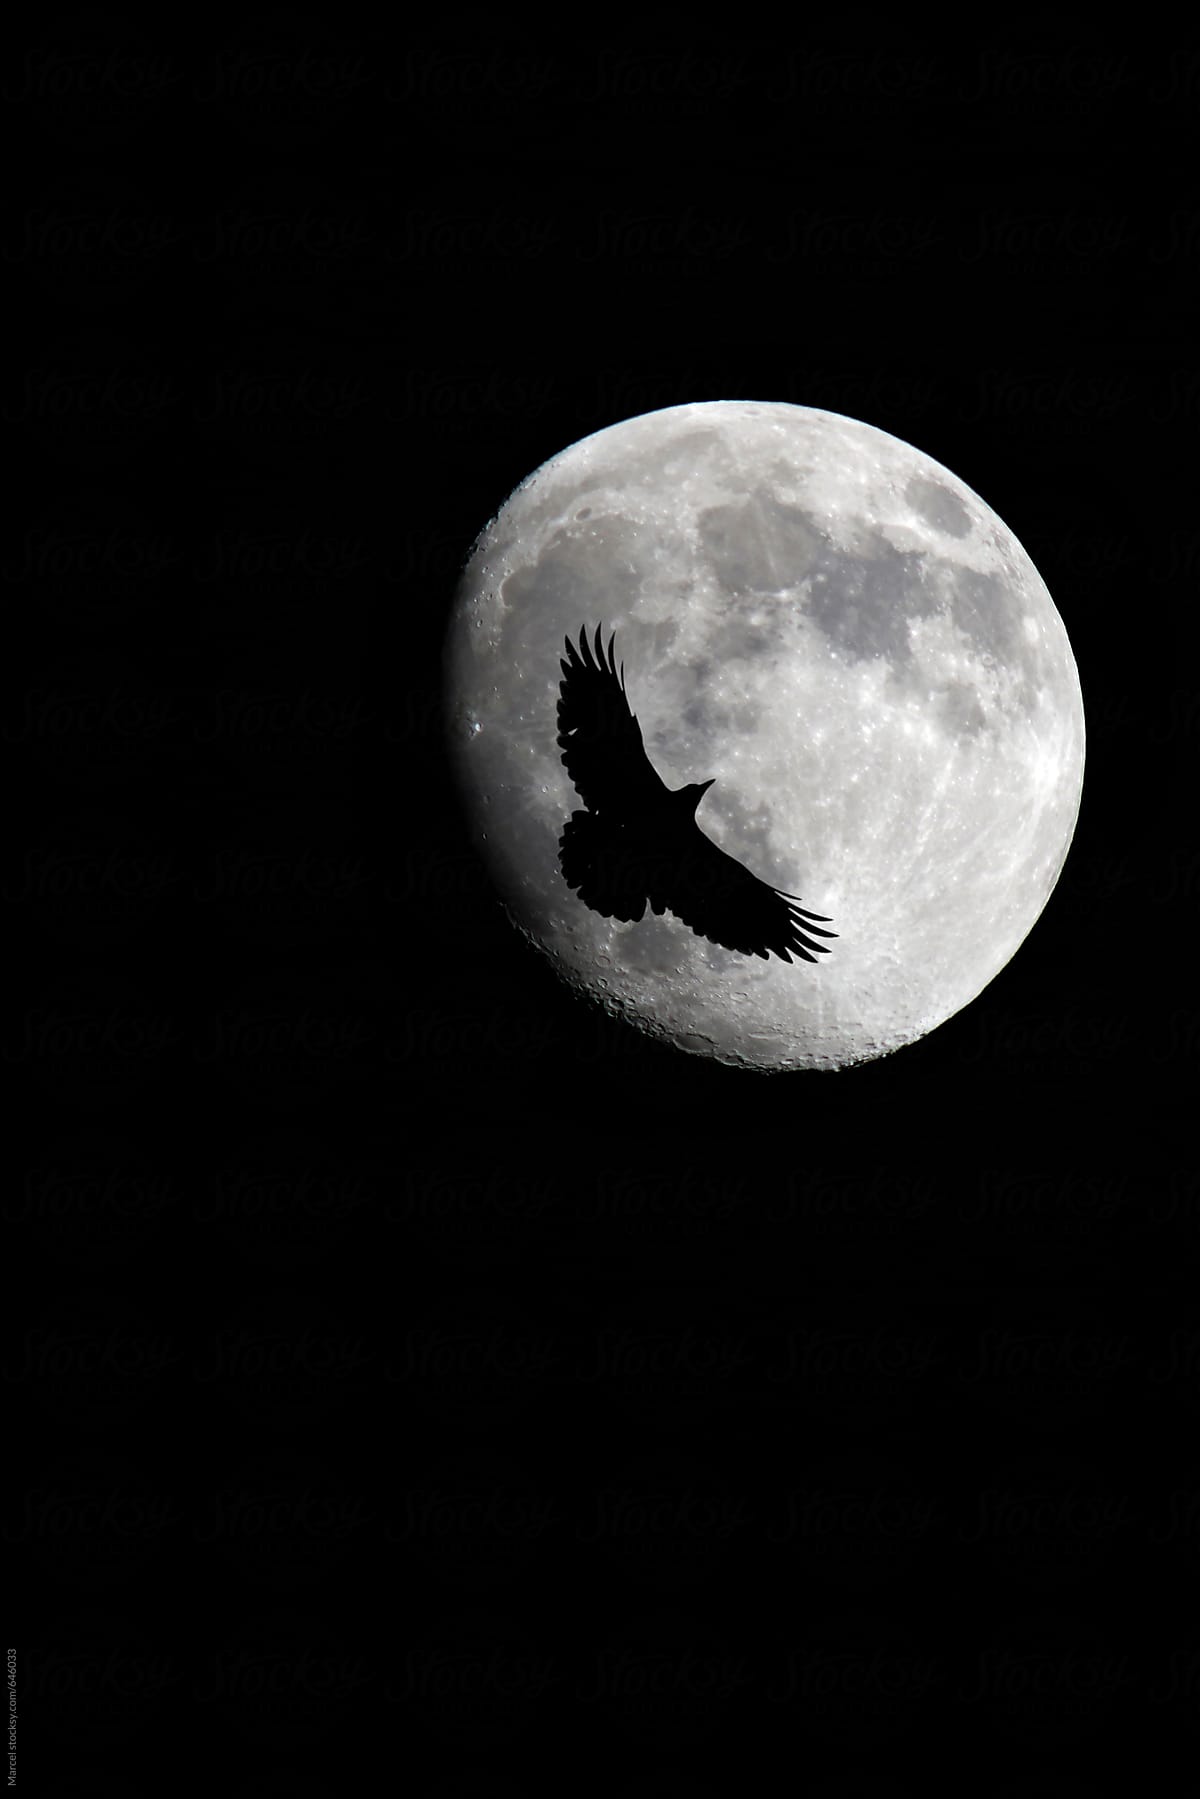 Black crow in front of almost full moon